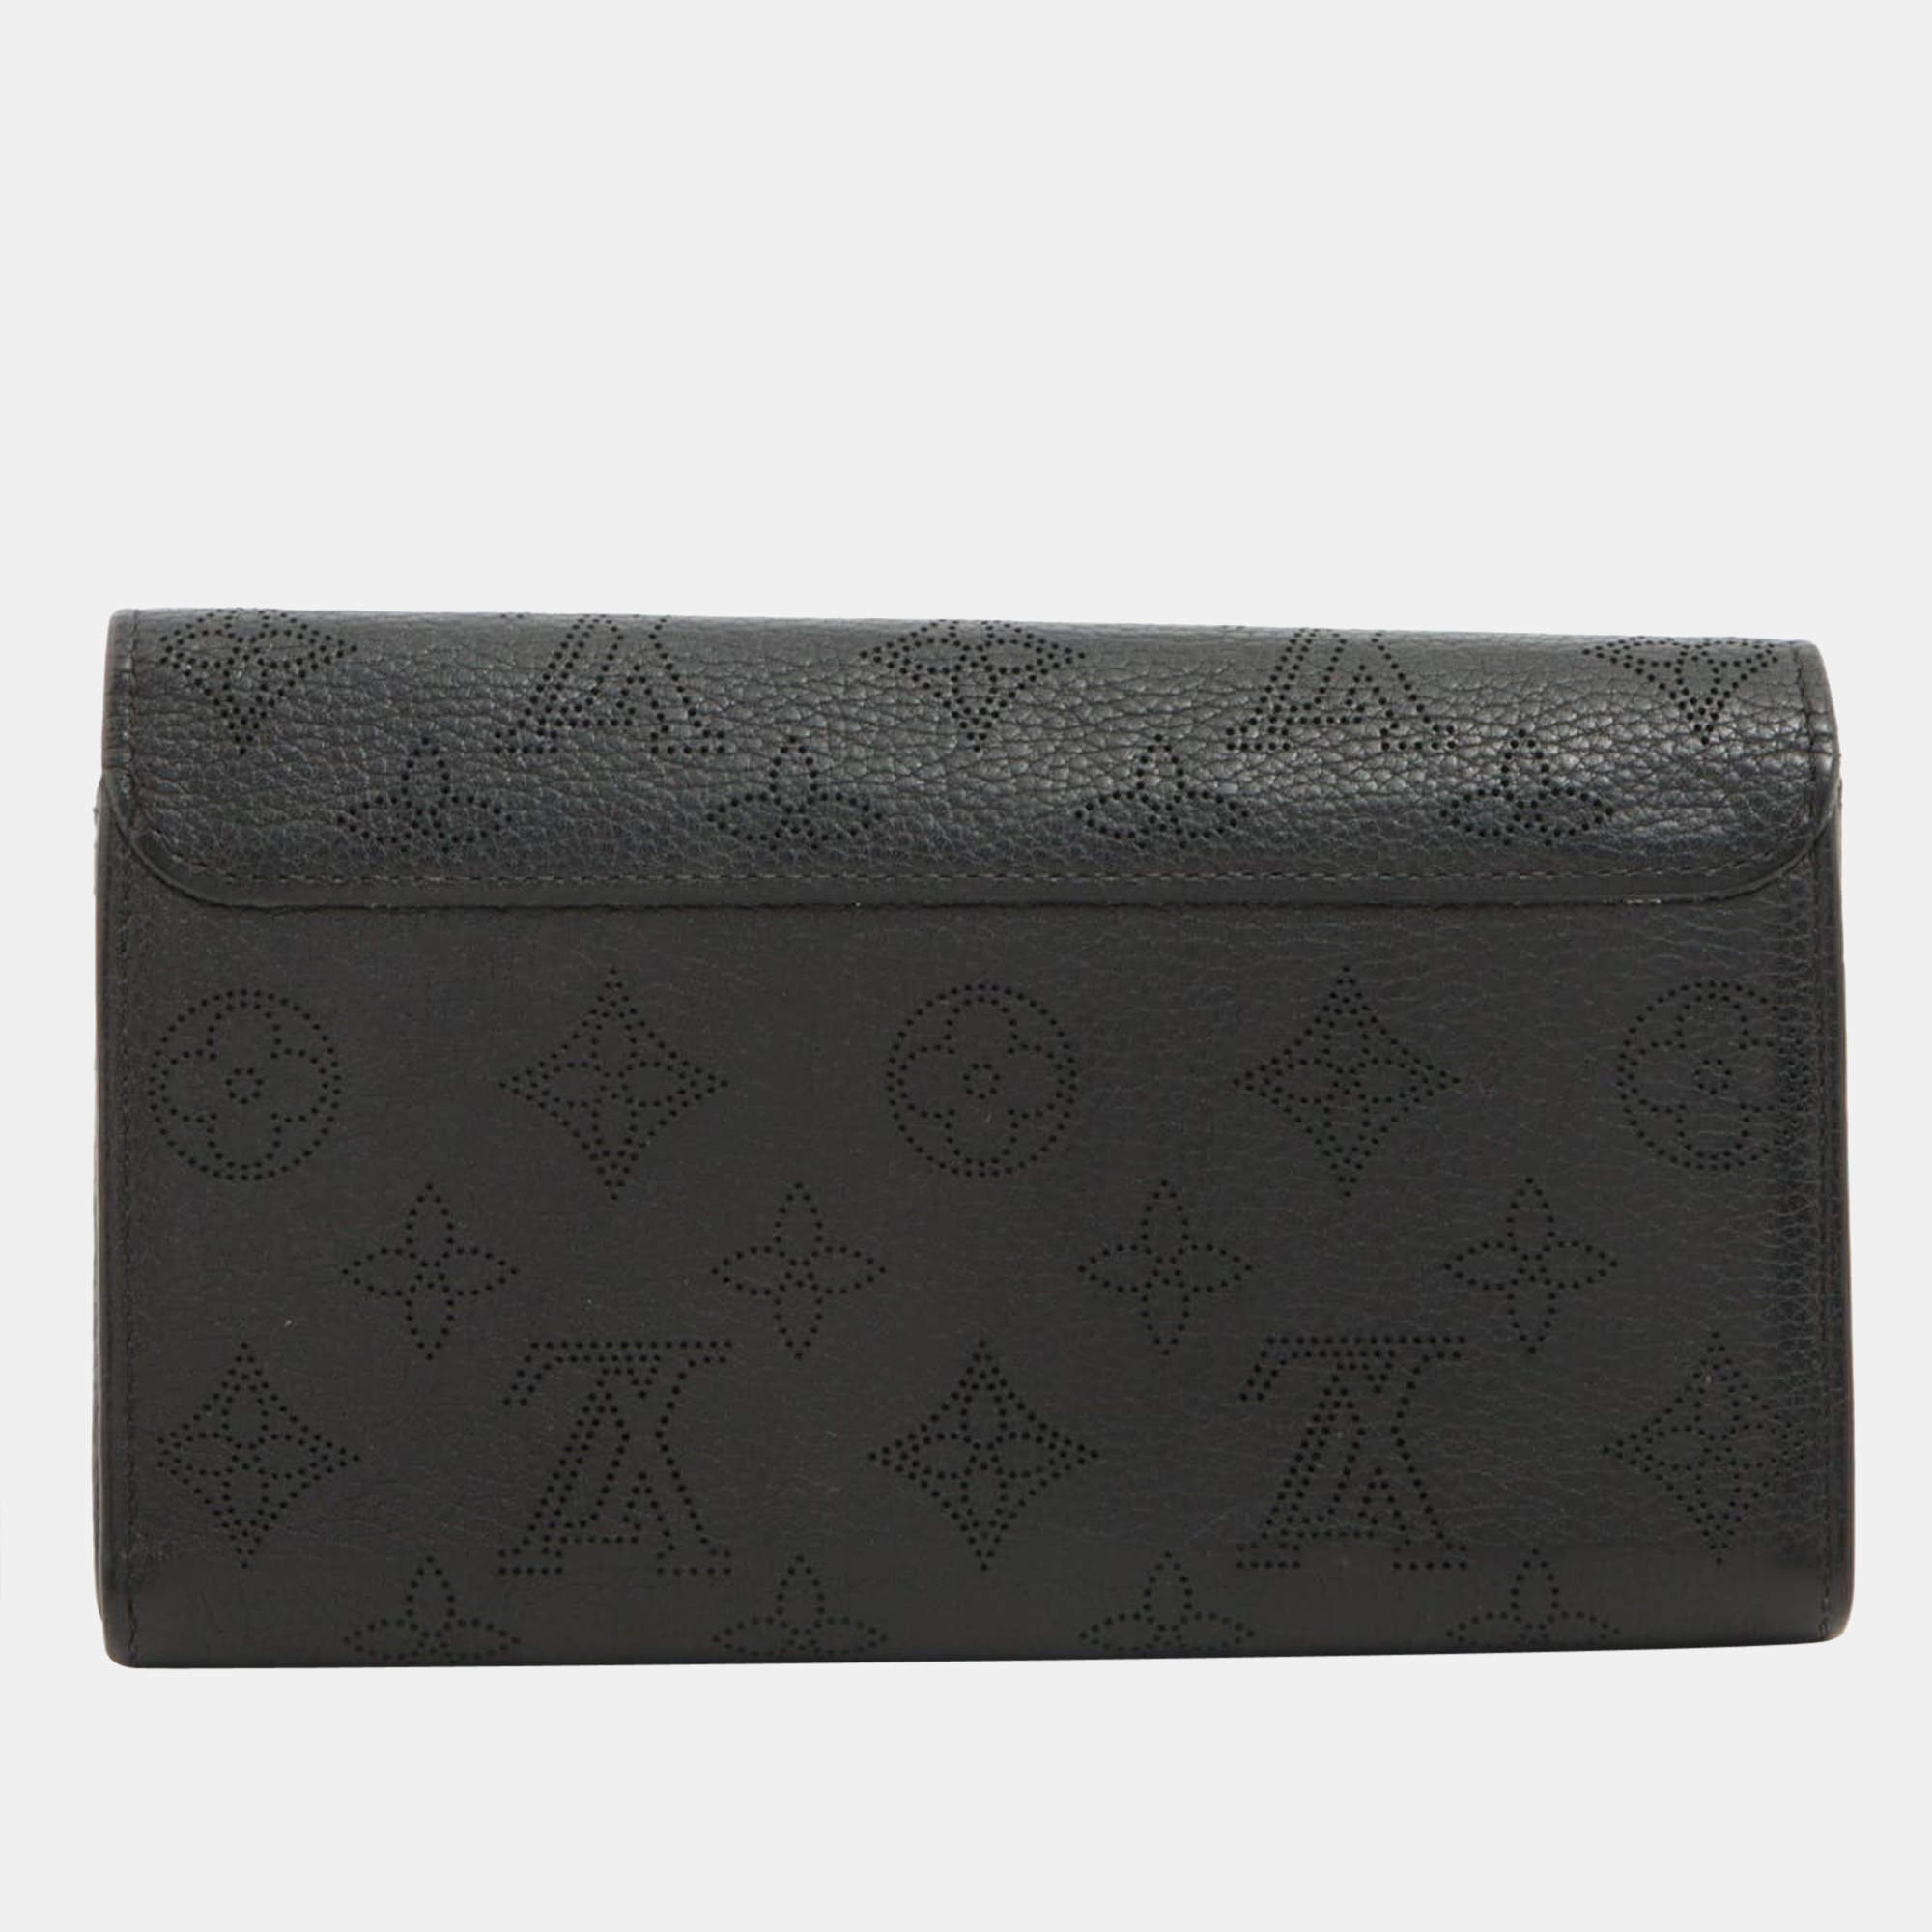 Card Holder Recto Verso Mahina Leather - Wallets and Small Leather Goods